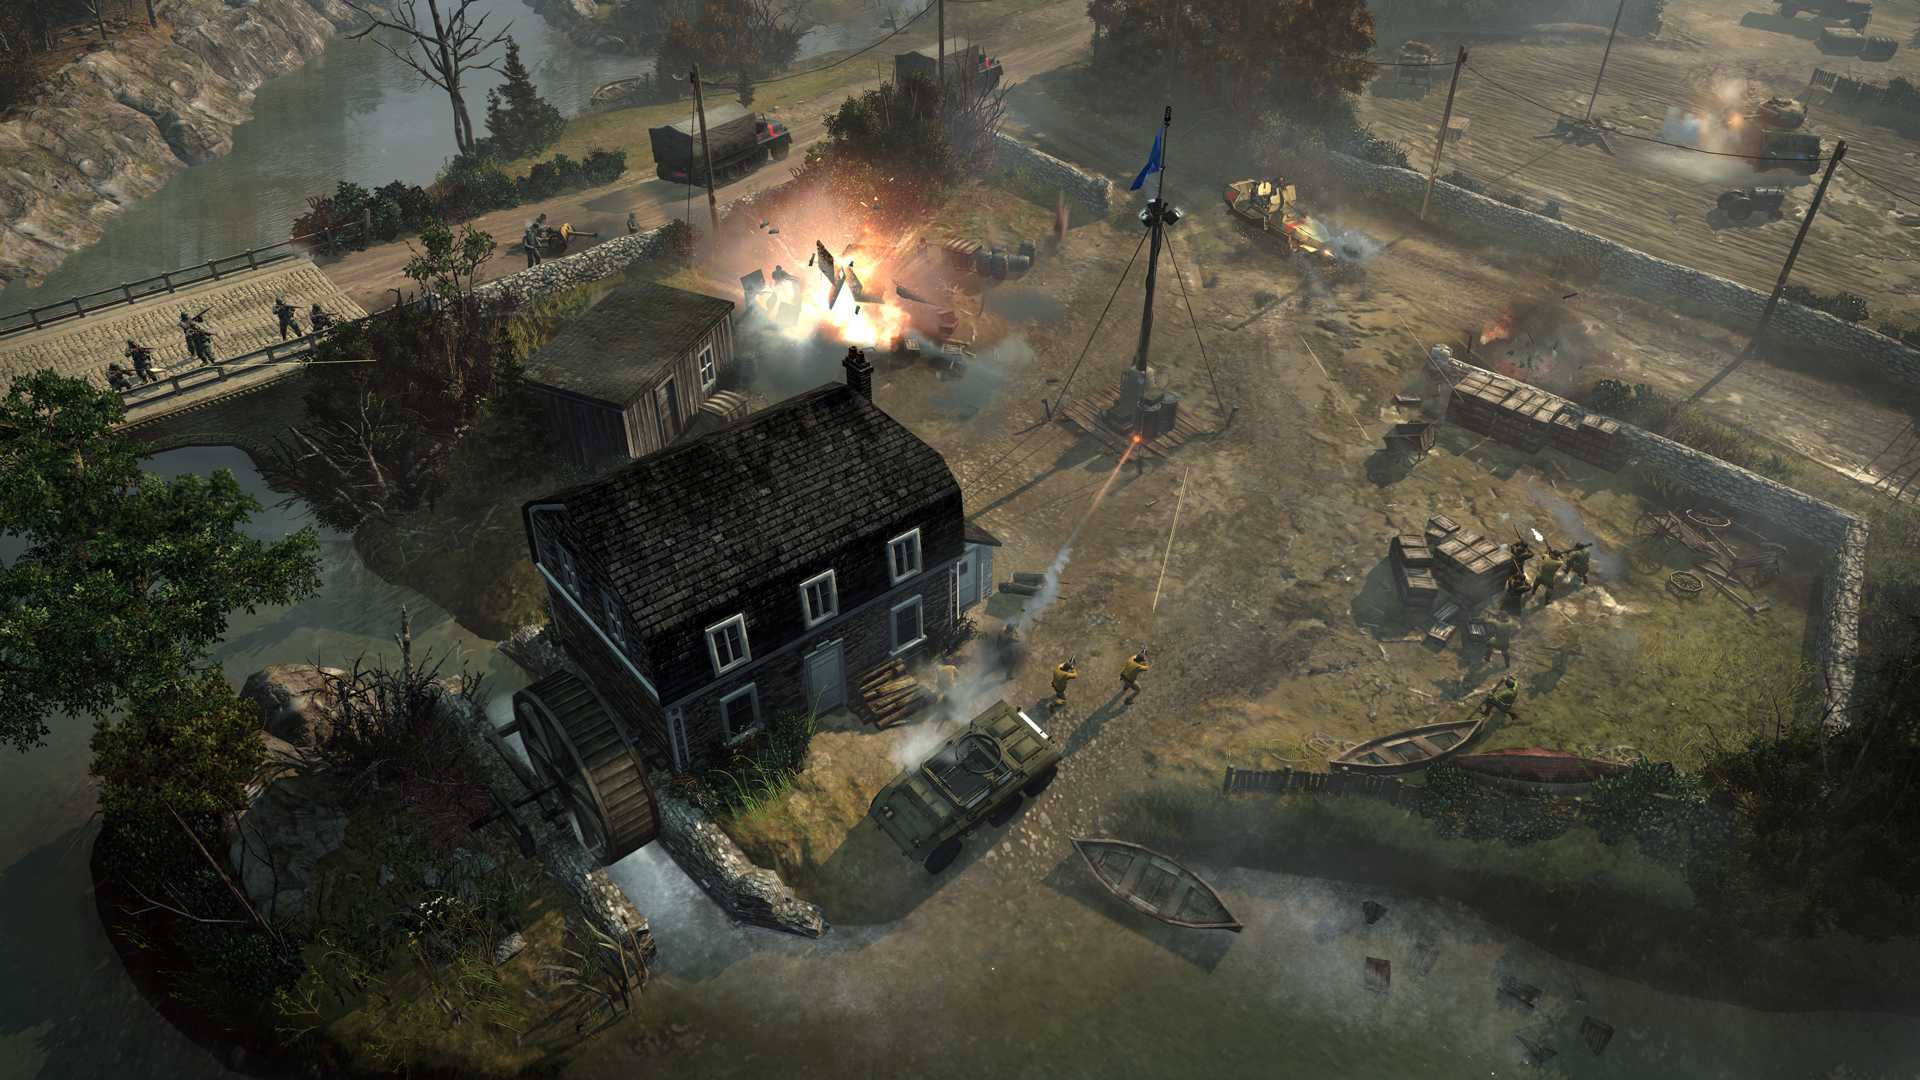 company of heroes 2 western front armies buy